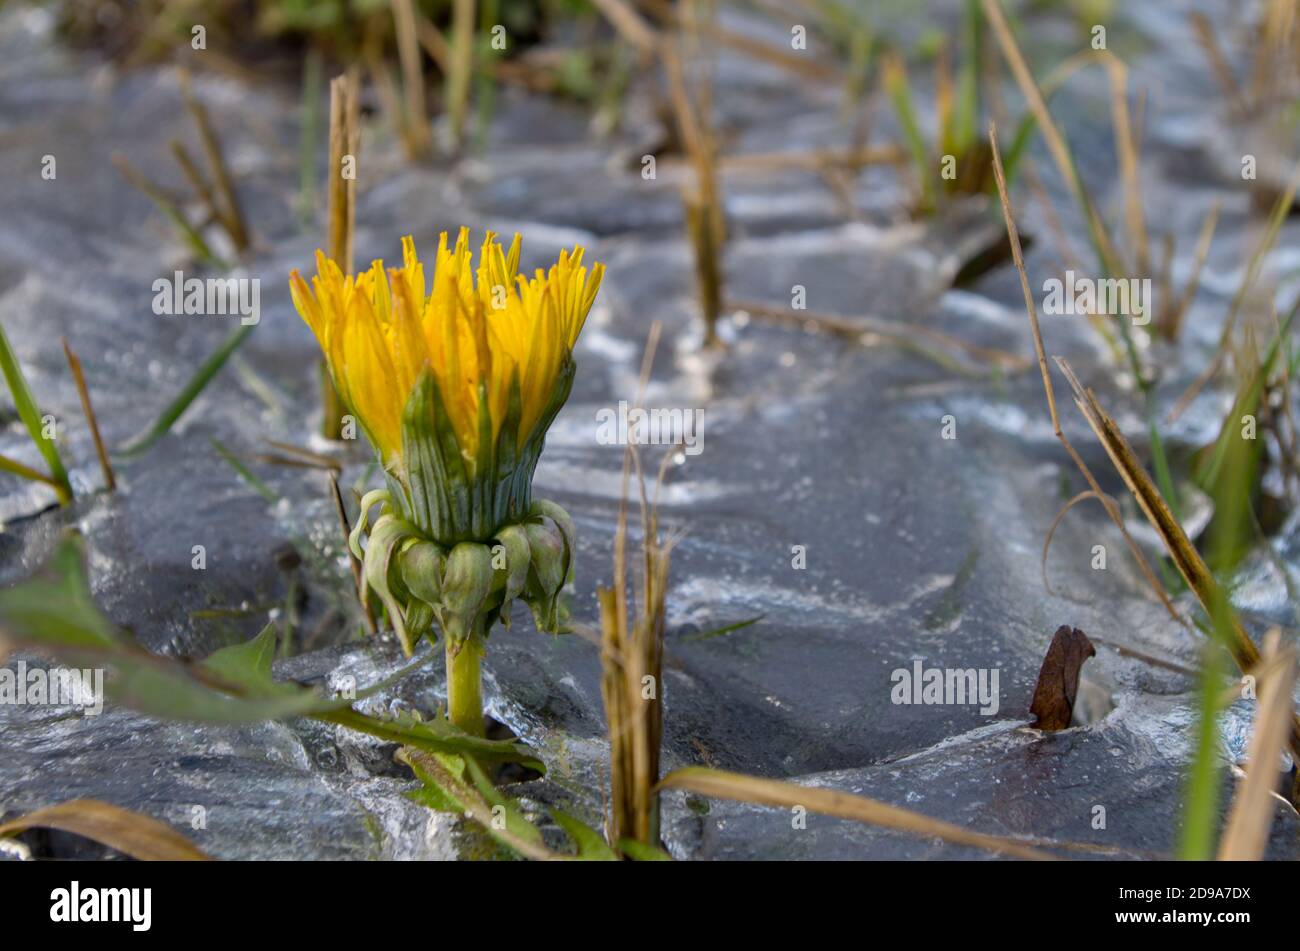 Dandelion breaking through crust of frozen ice, stalks of grass sticking out around. Concept: exultation of life, living beginning in cold reality. Stock Photo